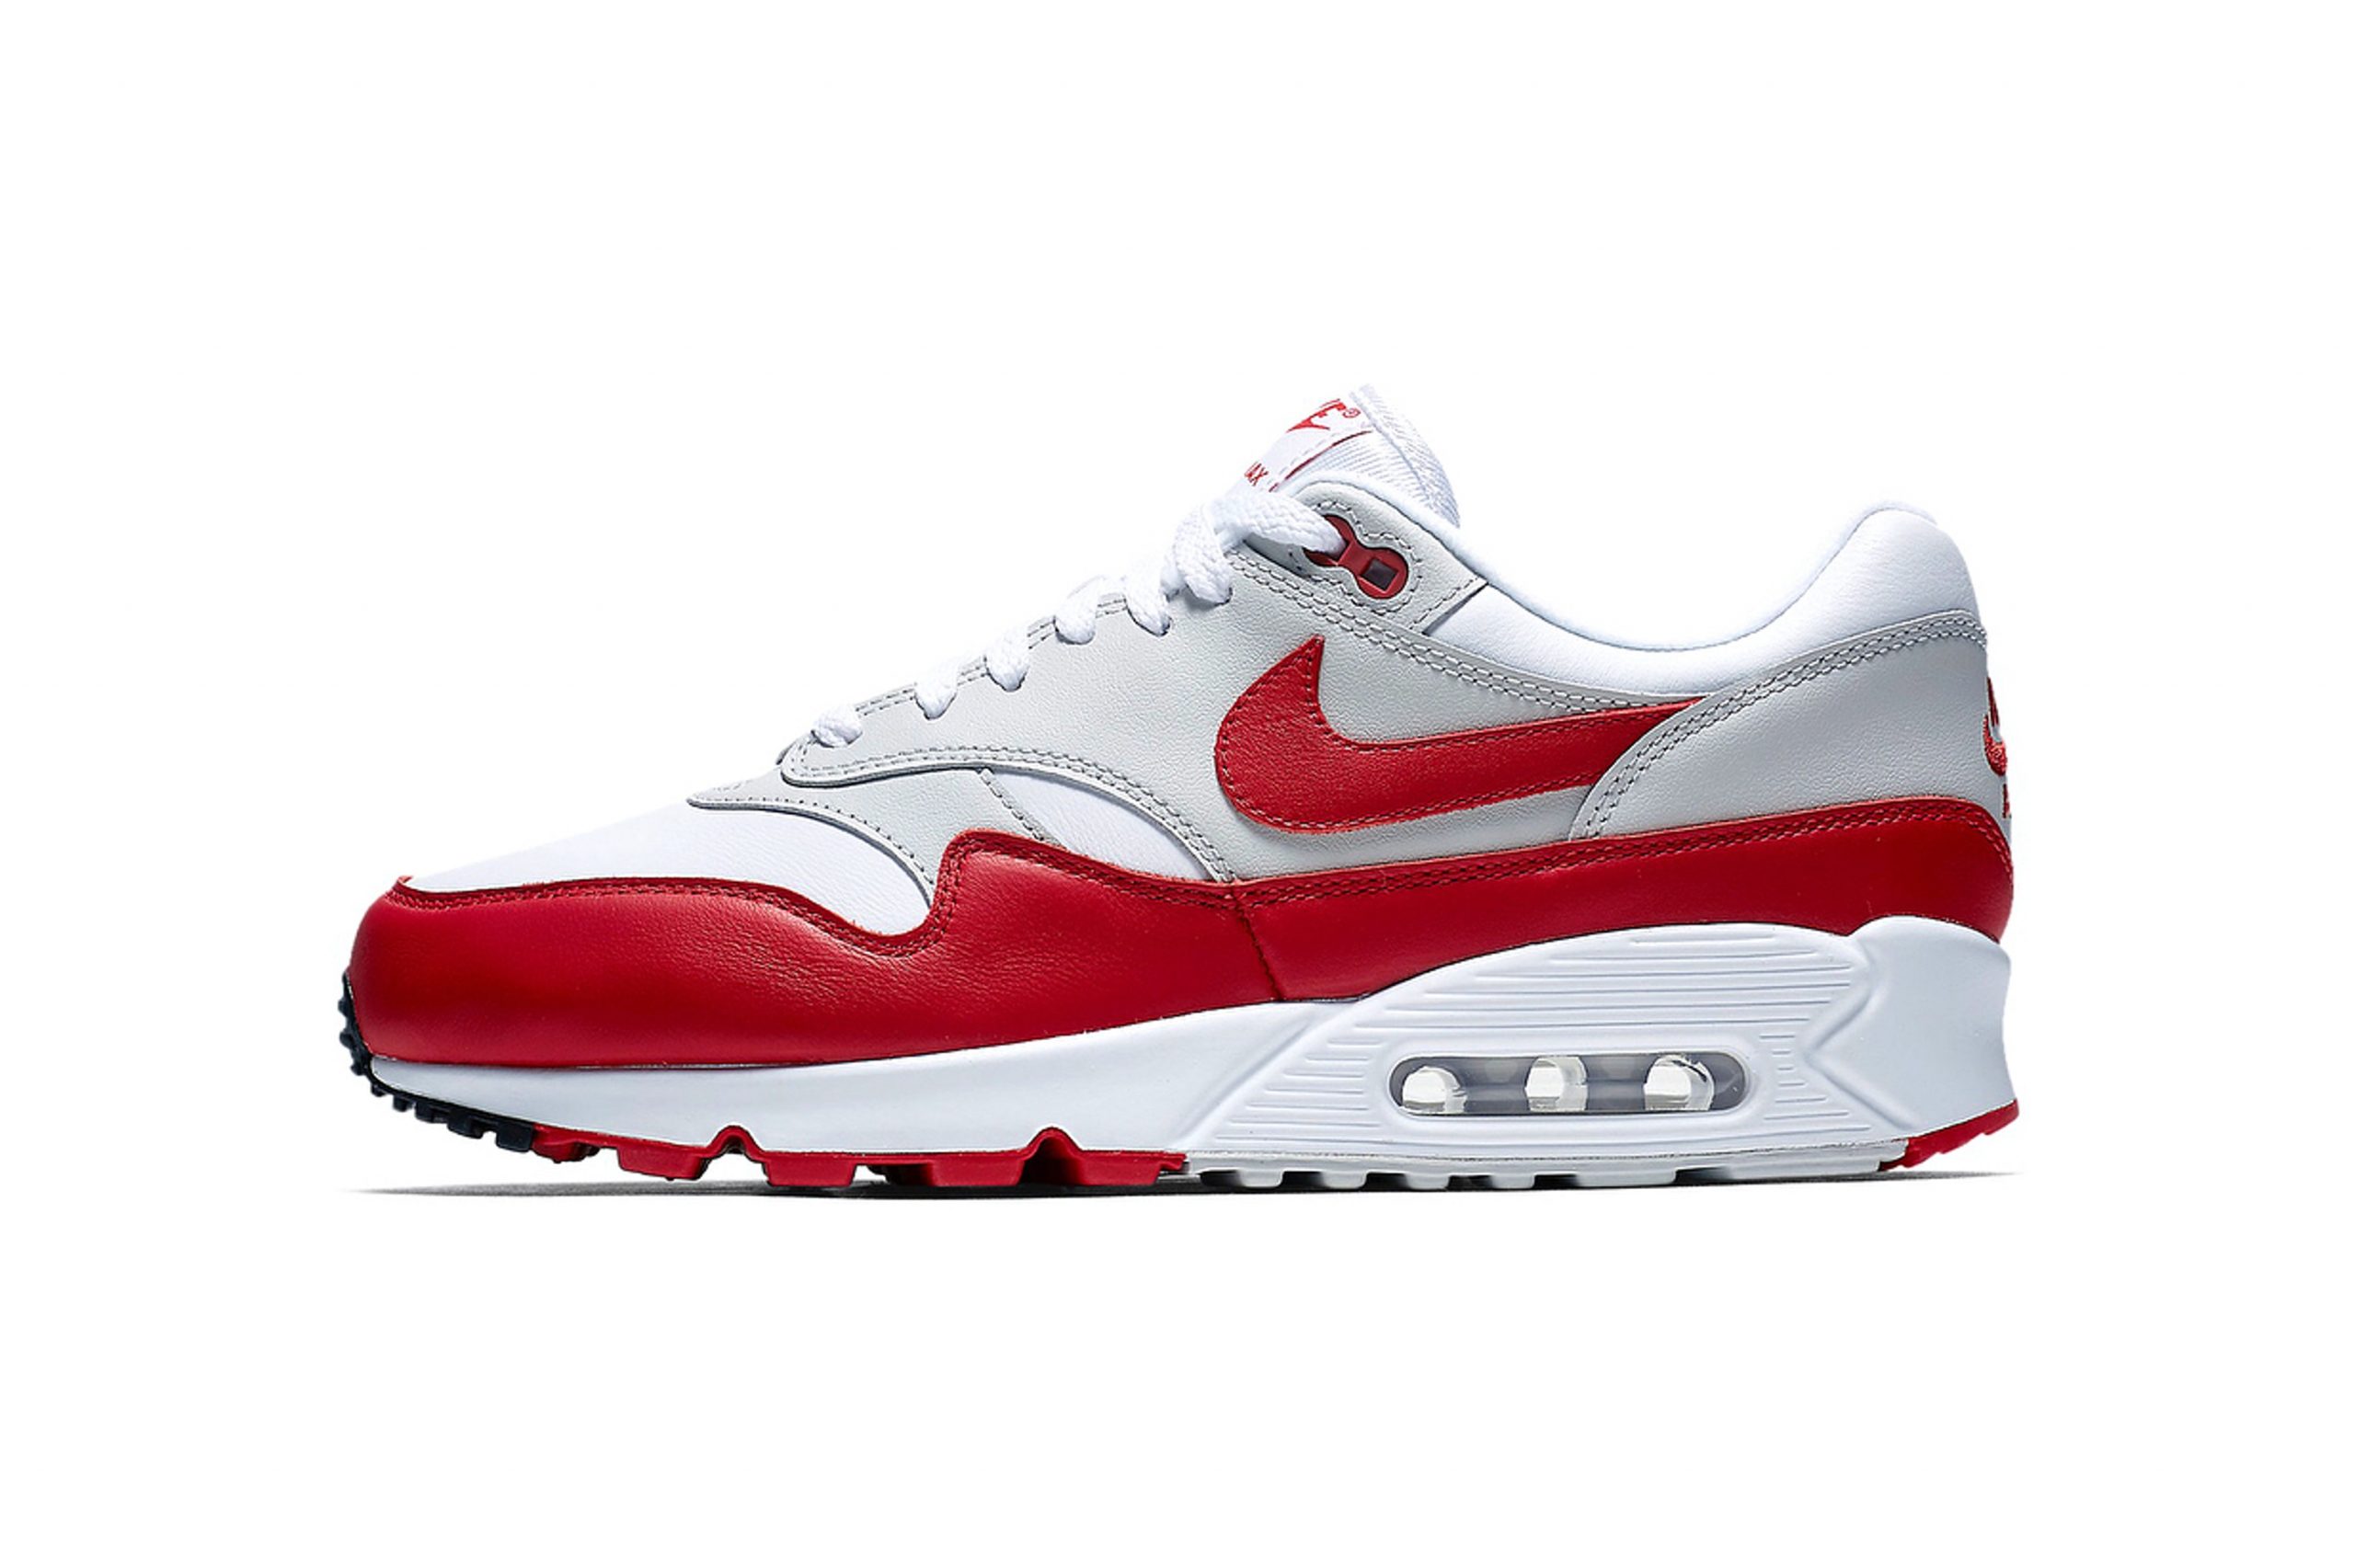 Dad is Air Max 90, mother is Air Max 1 - I will be Air Max 90/1